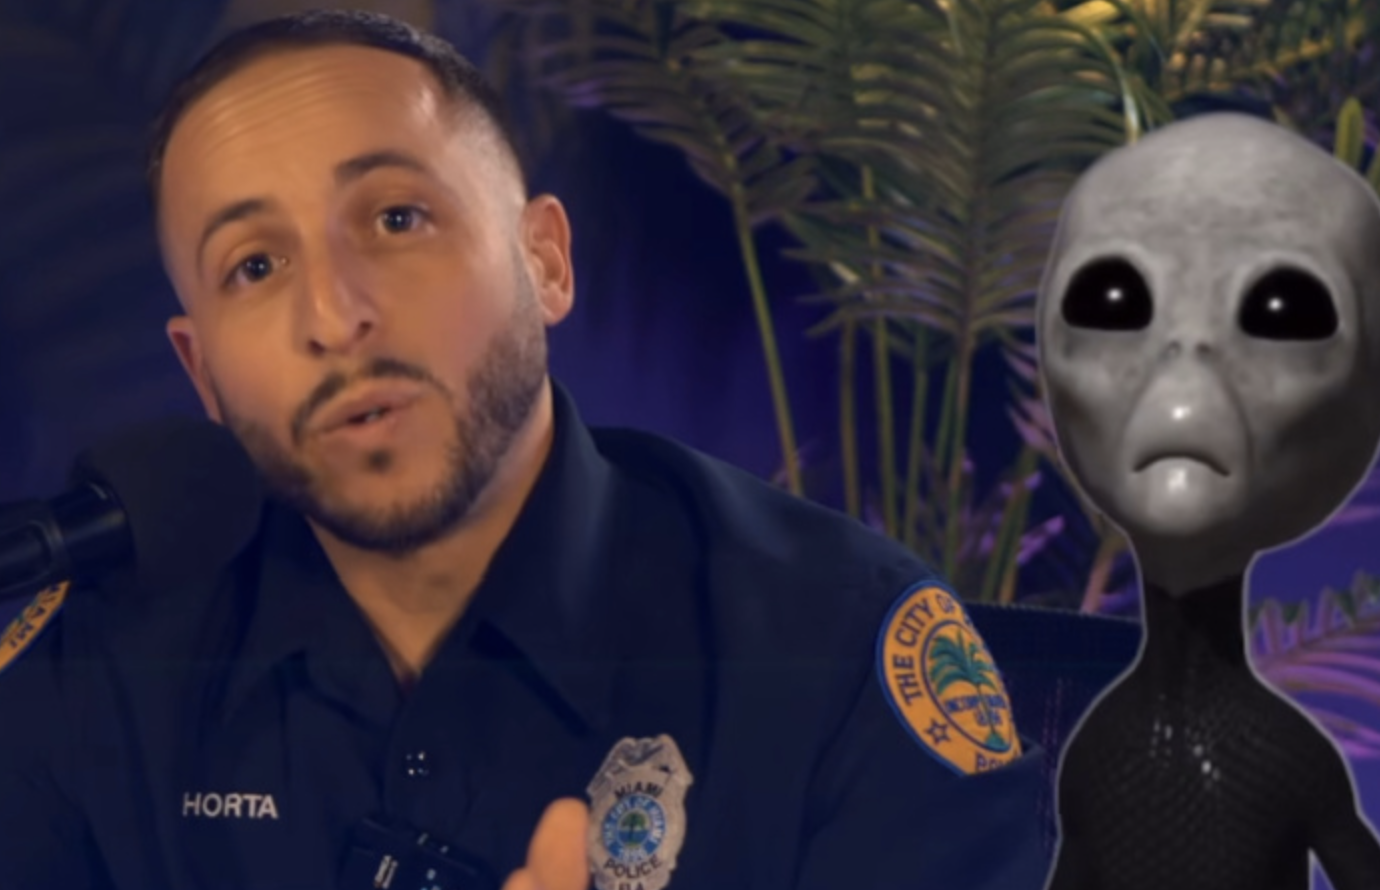 Florida Police Are Responding To Claims That They Were Called To An Alien Sighting